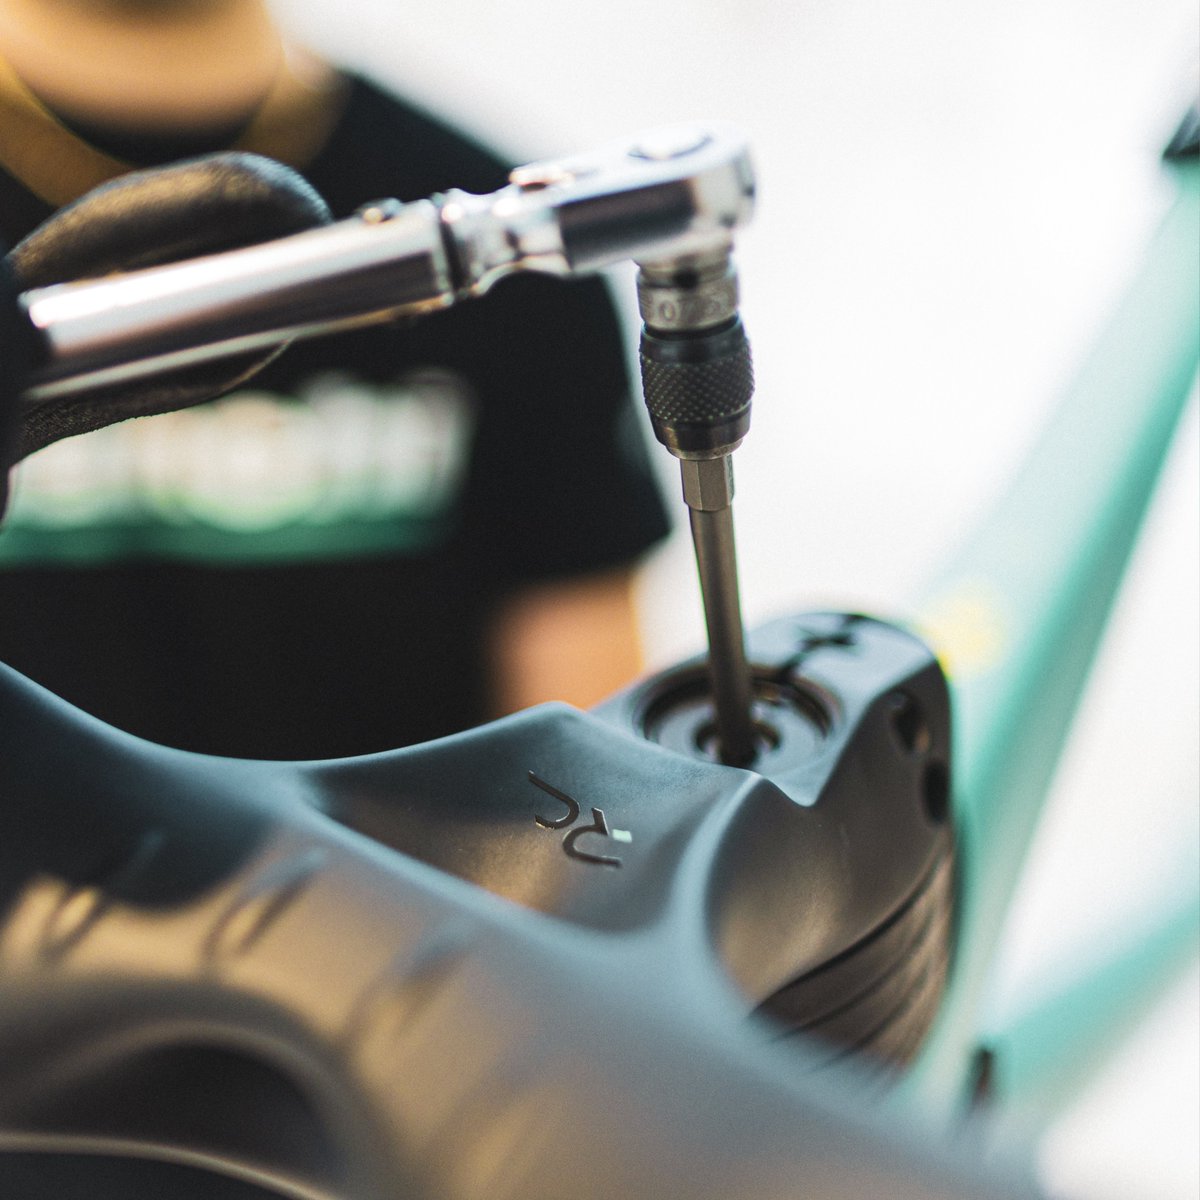 An enhanced offering with artisanal spirit. 
The Oltre RC Tour de France is hand-assembled by Reparto Corse, the group of pioneering innovators behind Bianchi’s cutting edge innovations.
👉bit.ly/3Pi6OsW 

#Bianchi #LeTourOfficialBianchi #TDF2023 #OltreRC #RideTheLegend